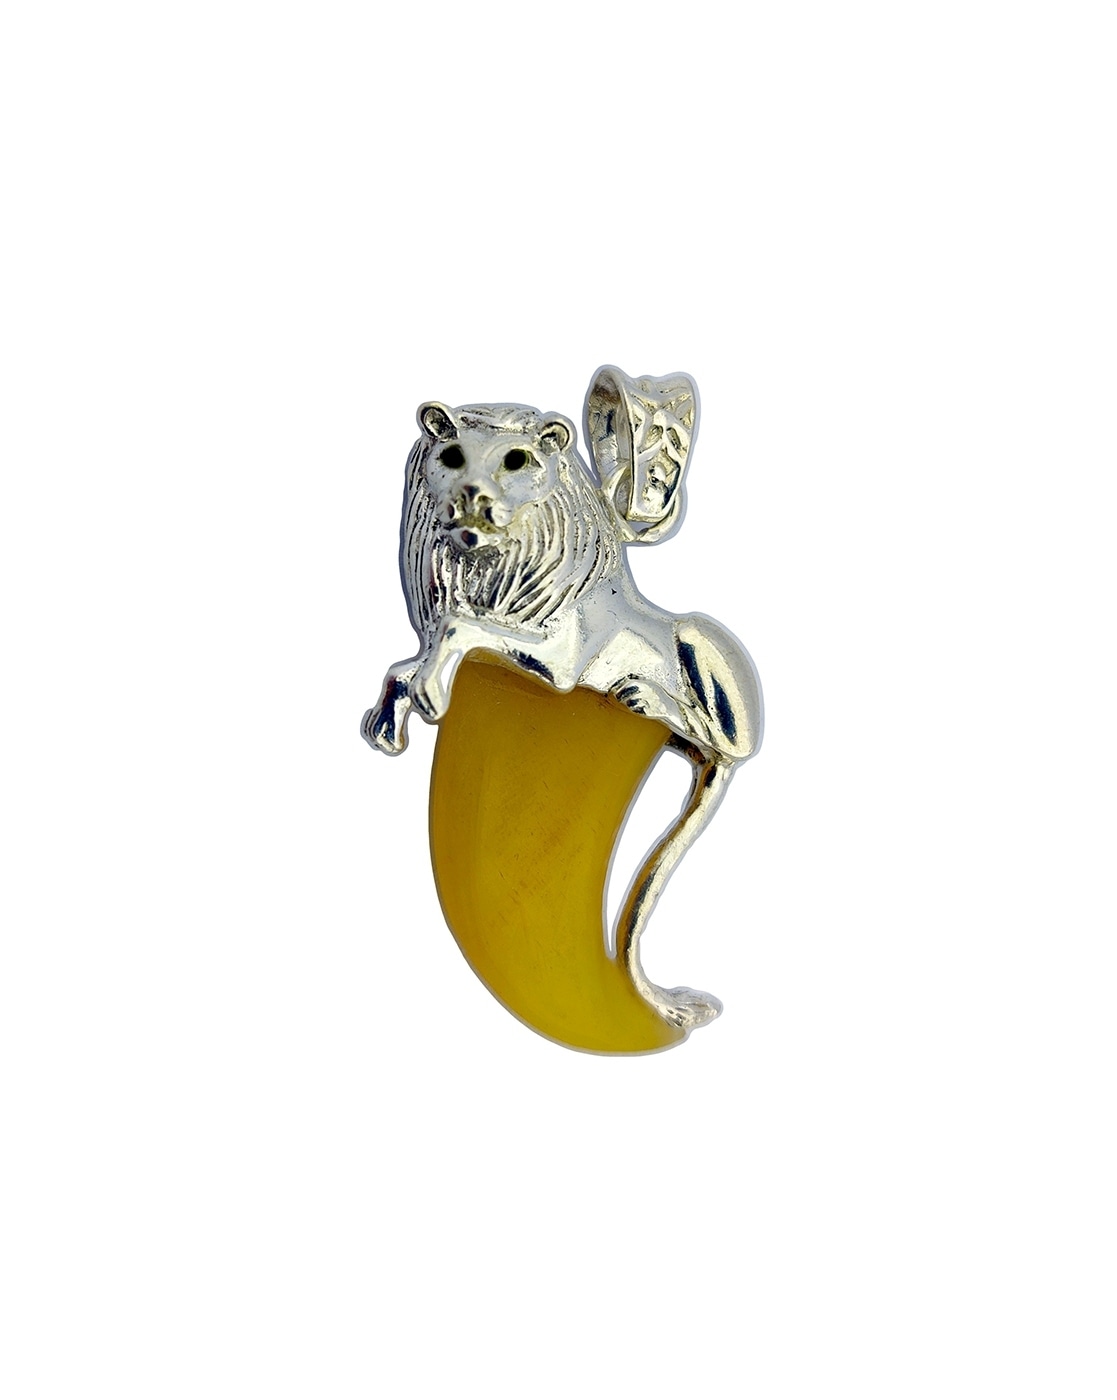 Sophisticated Design Gold Plated Artificial Lion Nail Pendant for Men -  Style B590 at Rs 1100.00 | Pendant | ID: 2851726590512